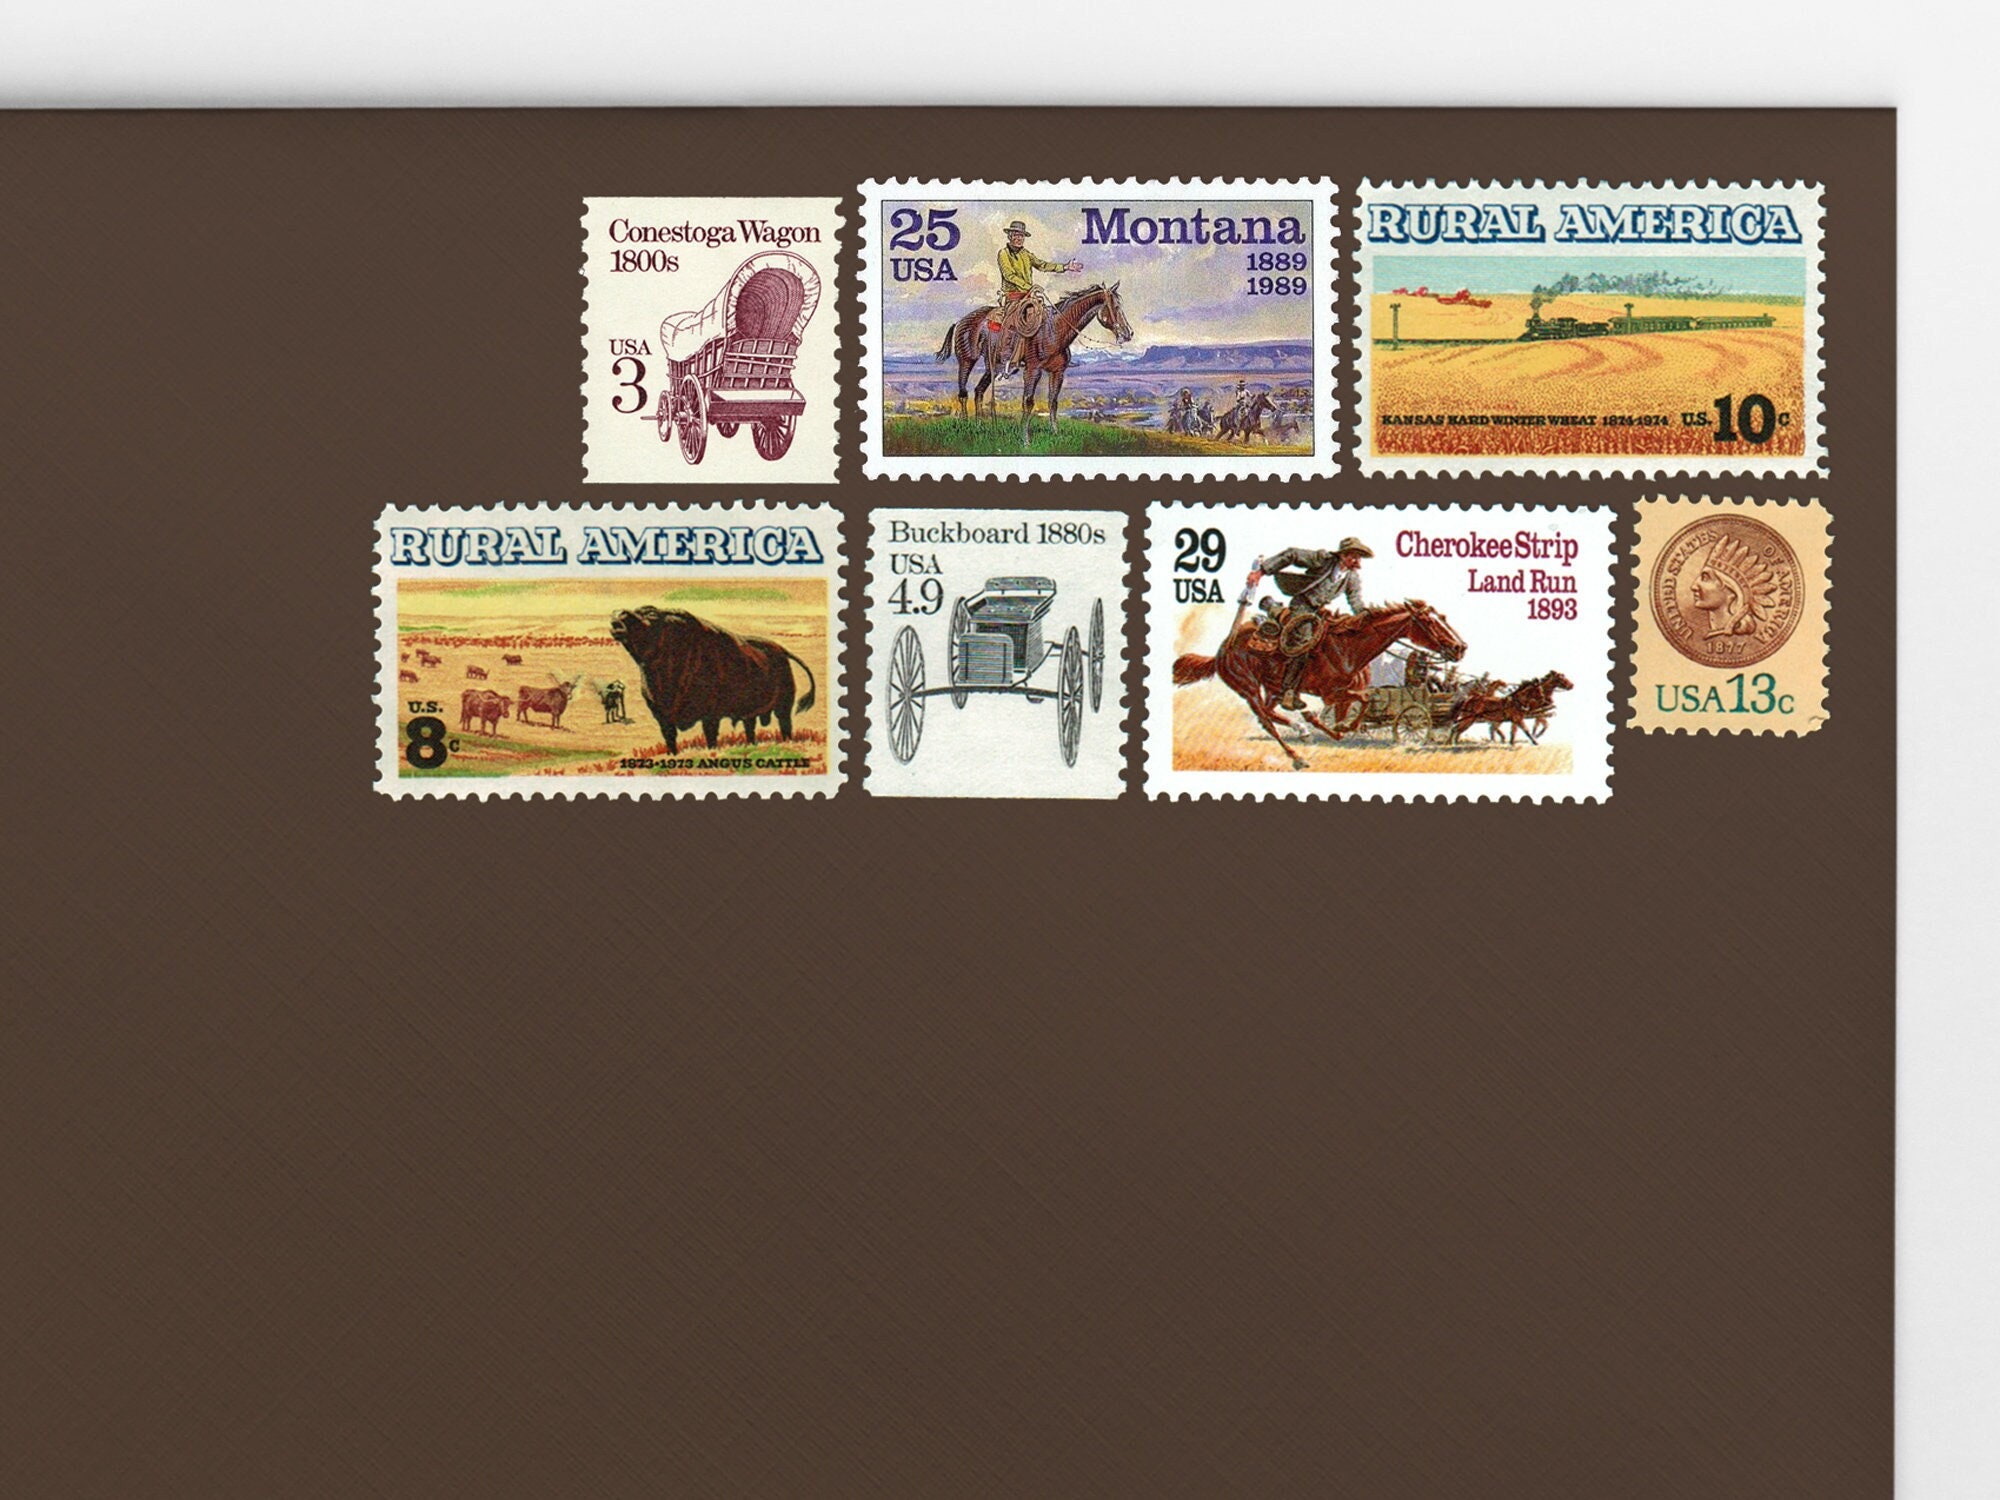 Western Wear USPS First Class Forever Postage Stamps 1 Book of 20 Cowboy  Rodeo Ranch Farm Agriculture Birthday Anniversary Wedding Celebrate (20  Stamps) 